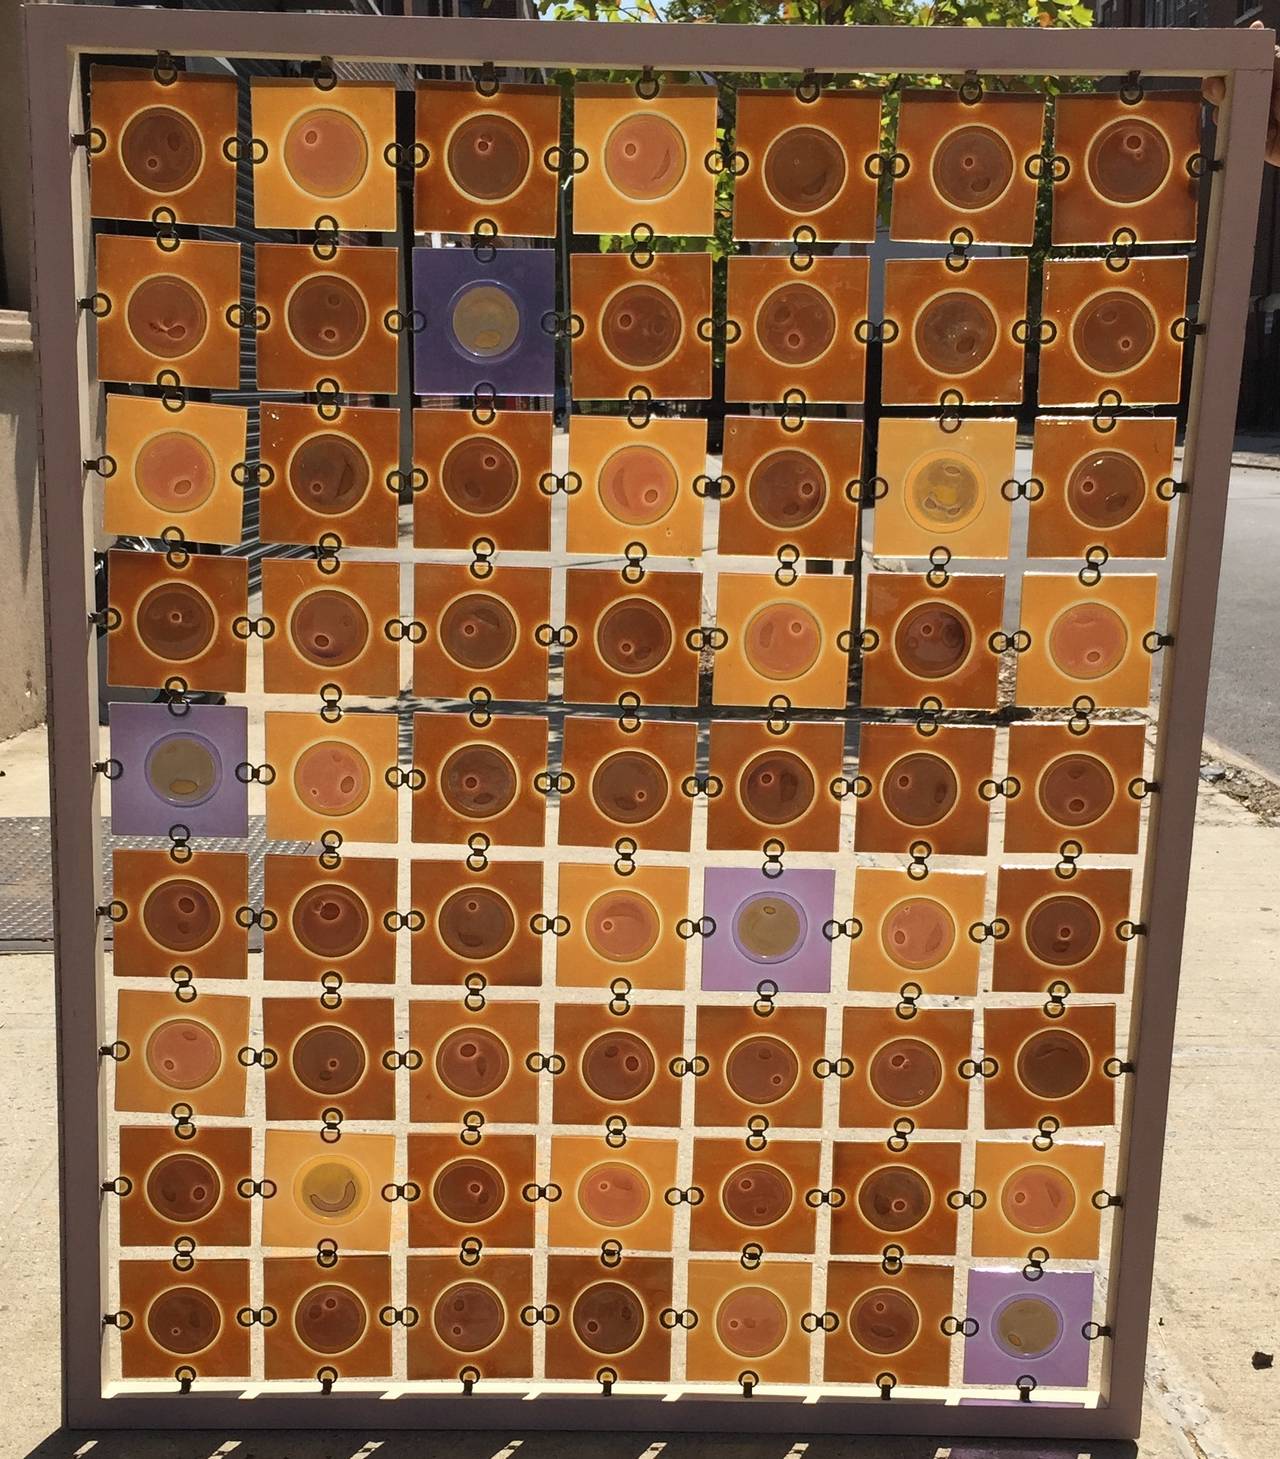 Rare five-color glass panel screen in wood frame by Michael and Frances Higgins. Great modern design in neutral brown, orange and yellow tones, with bursts of blue and purple. 63 glass panels per screen. 

If removed from wood frame the glass can be